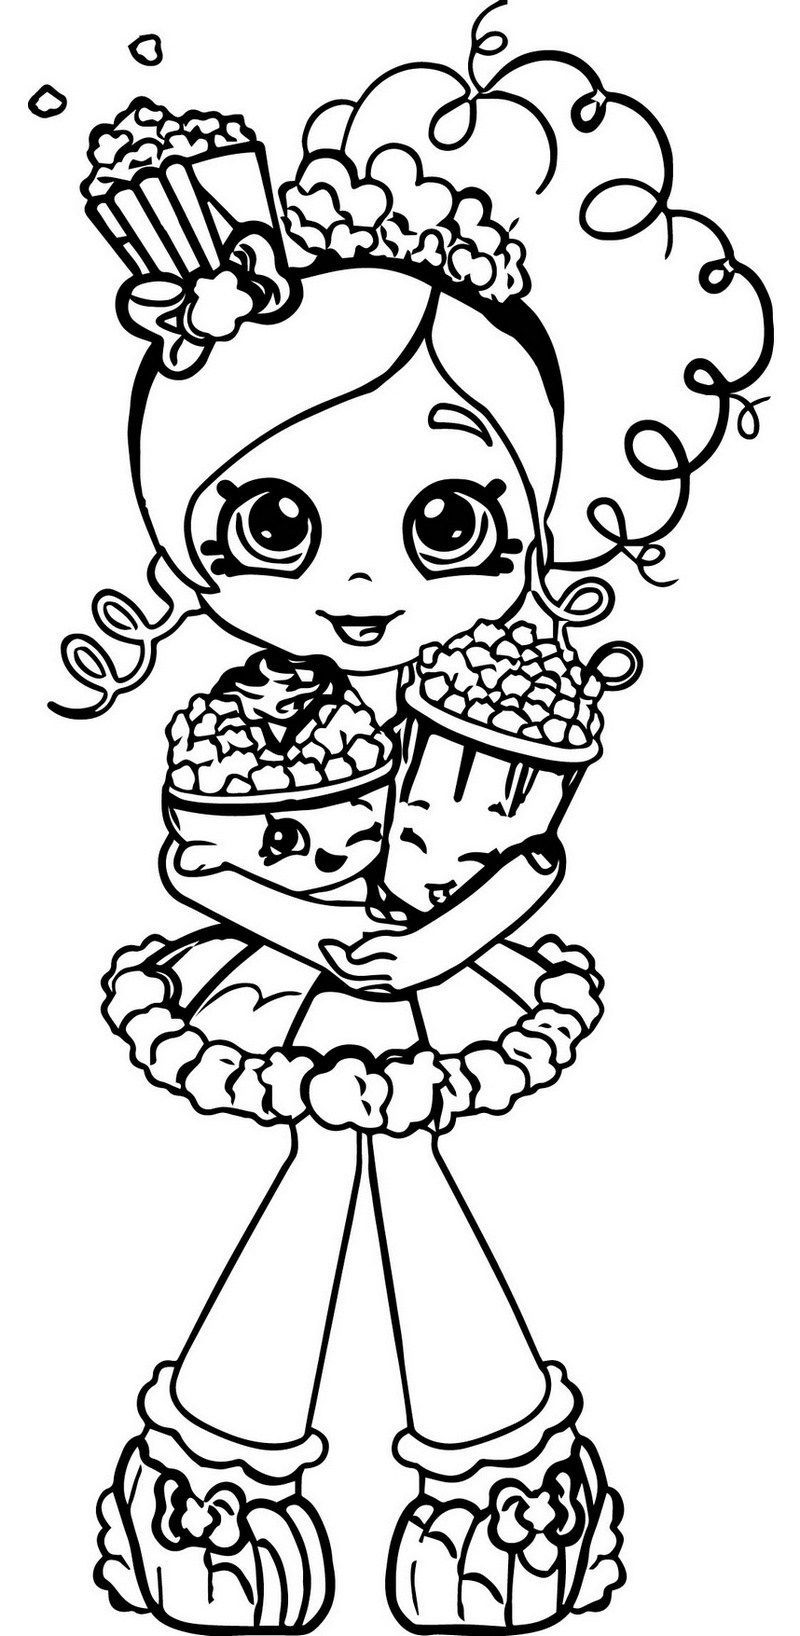 Coloring Pages : Popcorn Coloring Page Healthiest Snack Shopkin Pages  Shopkins P Is For Popcorn Coloring Page ~ Off-The Wall ATL